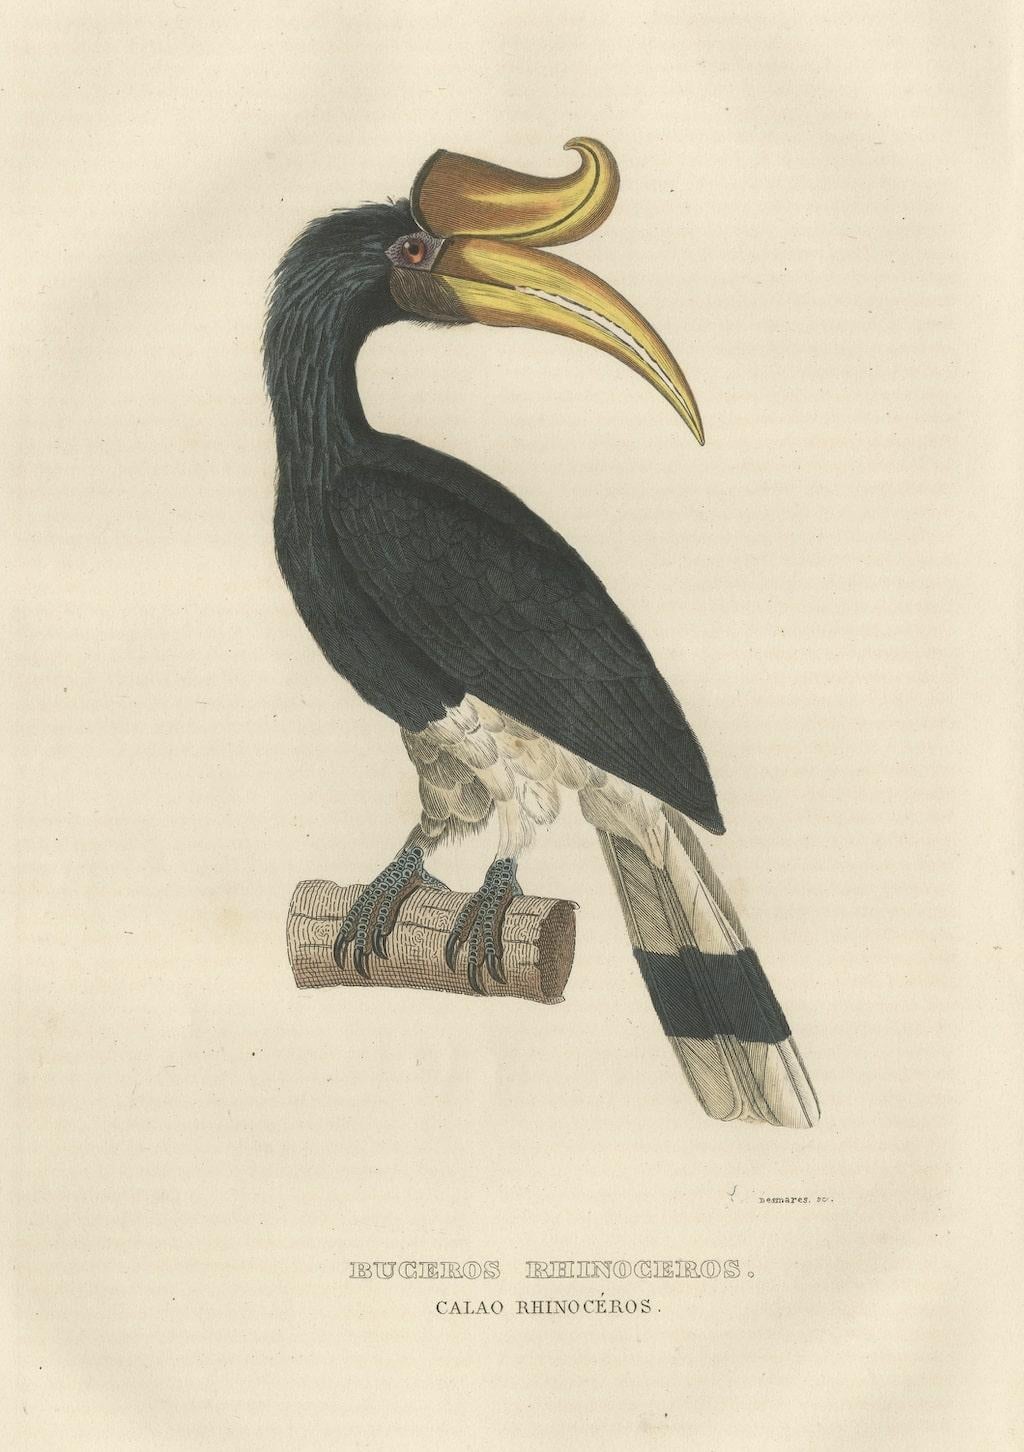 The Rhinoceros Hornbill, also known as the 